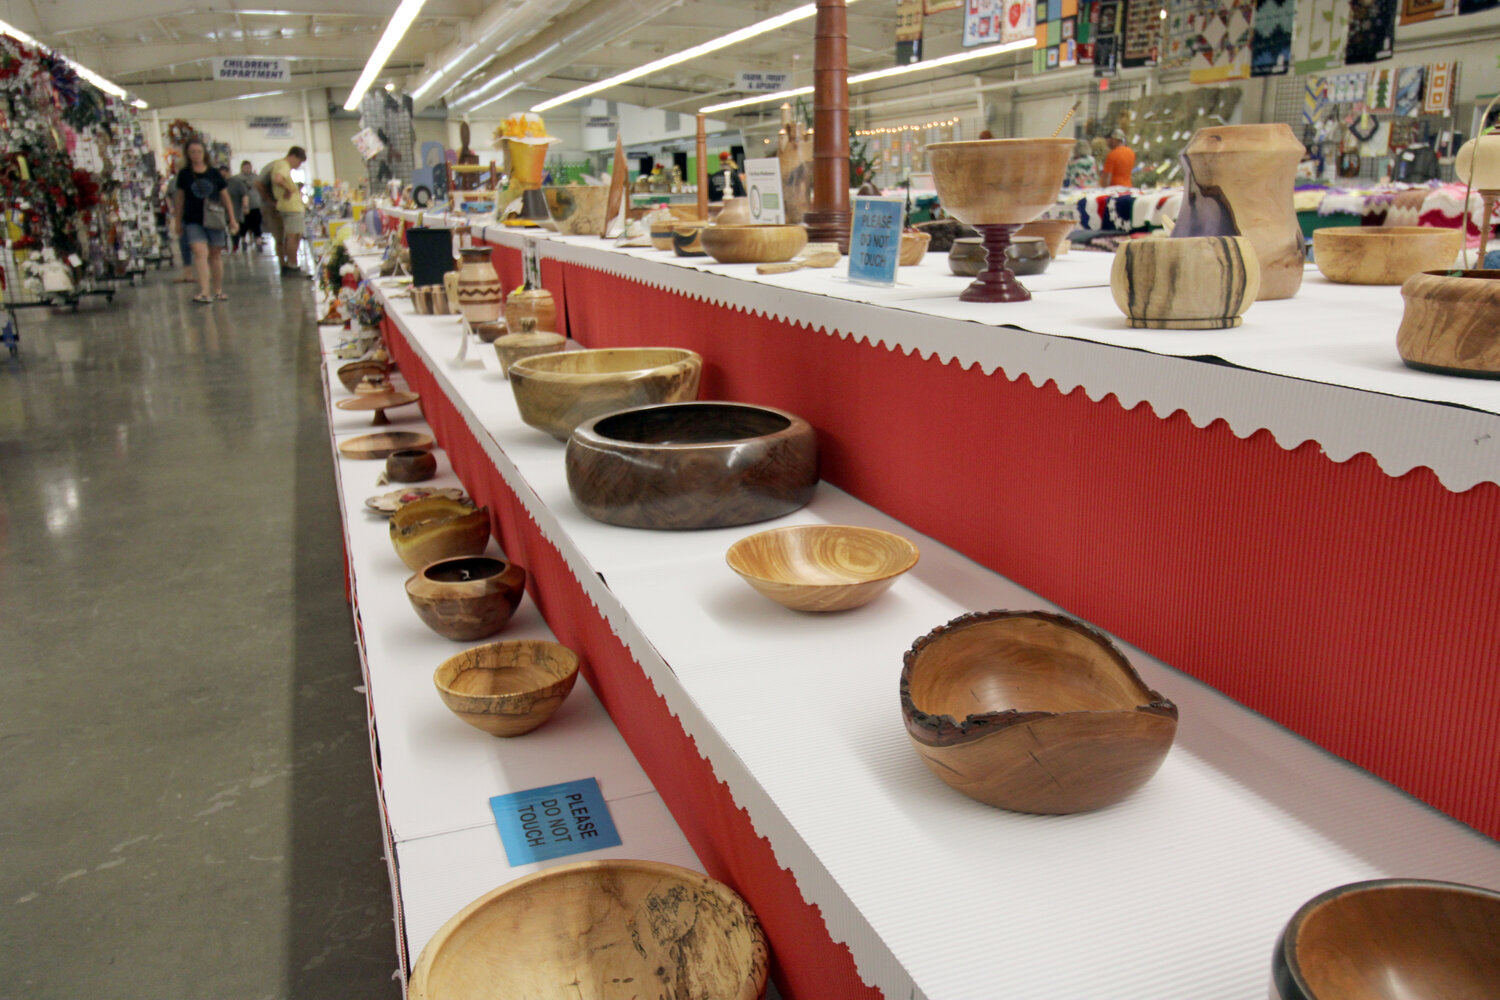 The Dover Building at the Delaware State fair, which started Thursday, is filled with examples of handmade items from culinary creations to wooden crafts.